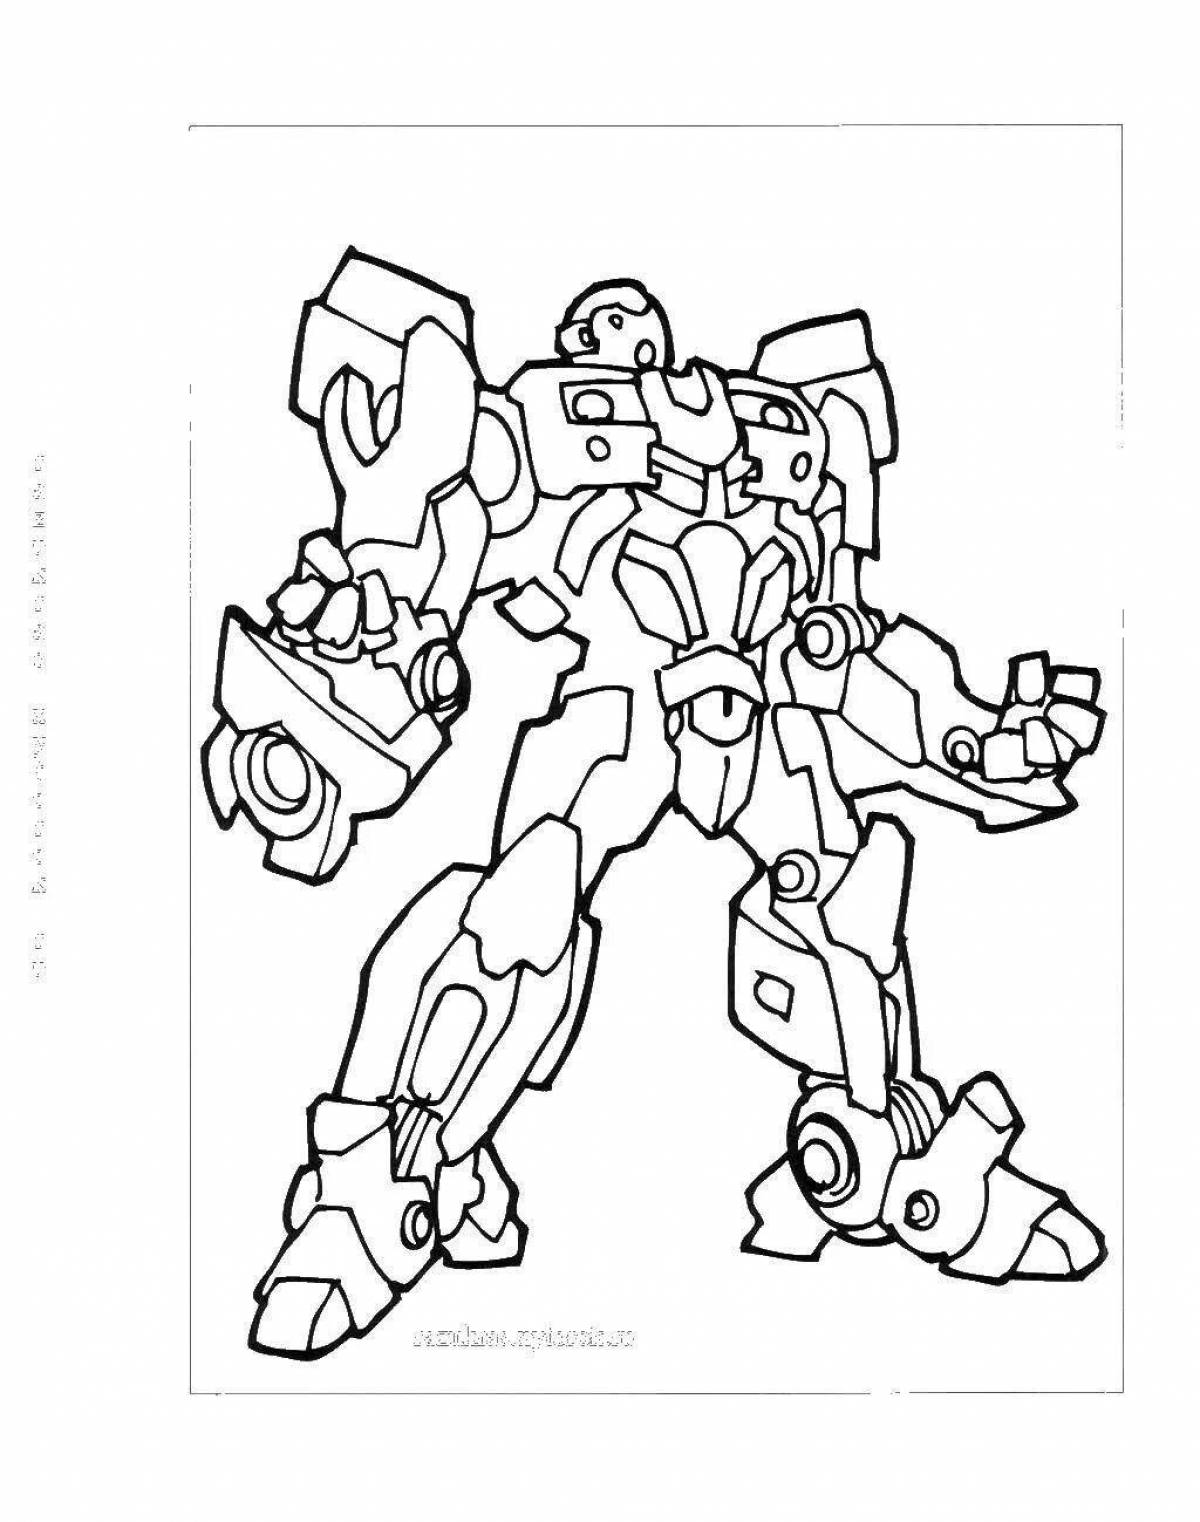 Animated magma 6 tobot coloring page